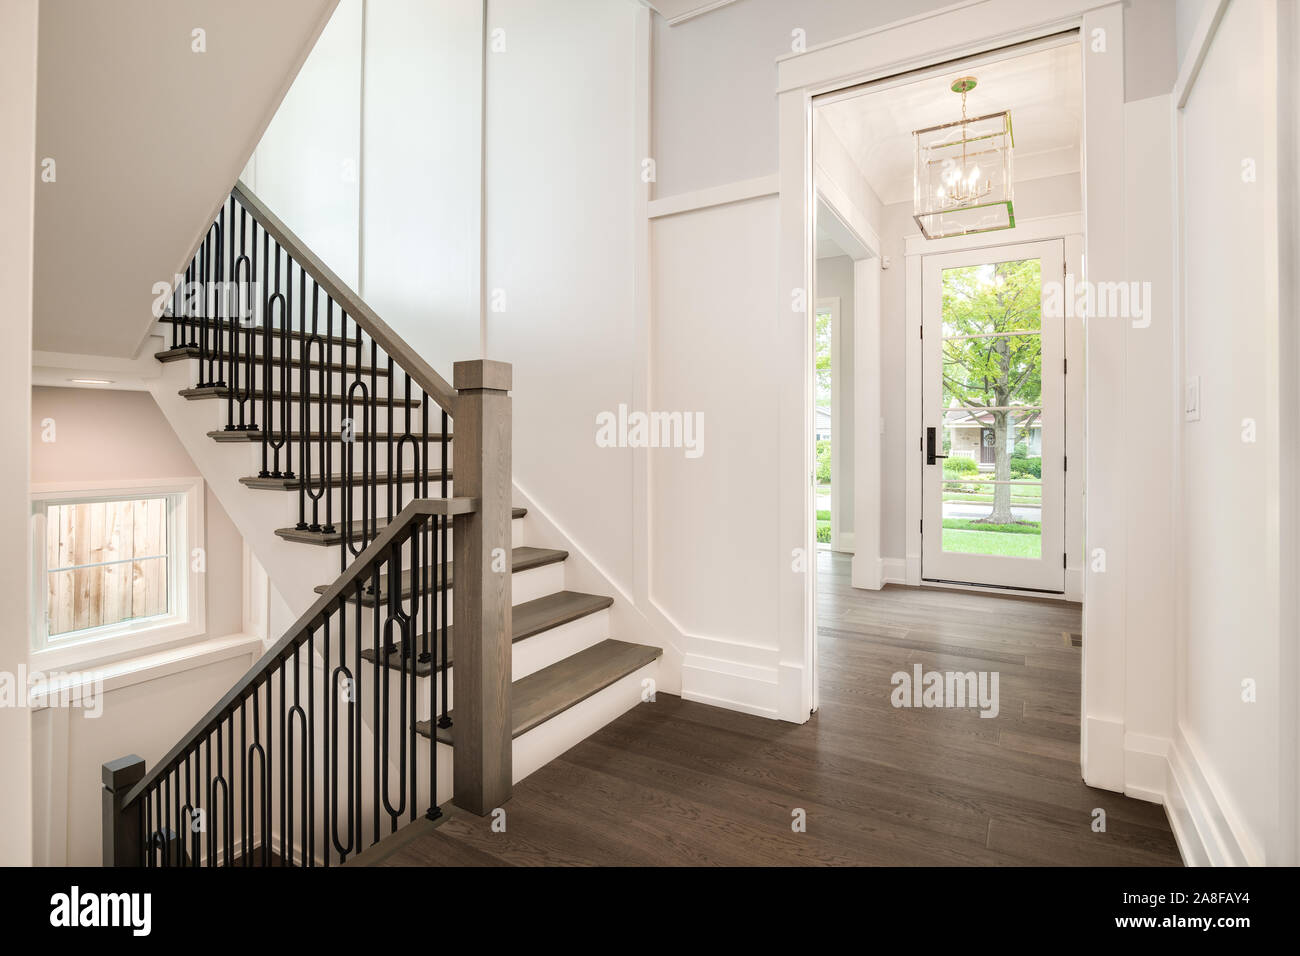 A new construction home with wrought iron railing on the staircase looking out to the front door and green trees and plants outside. Stock Photo